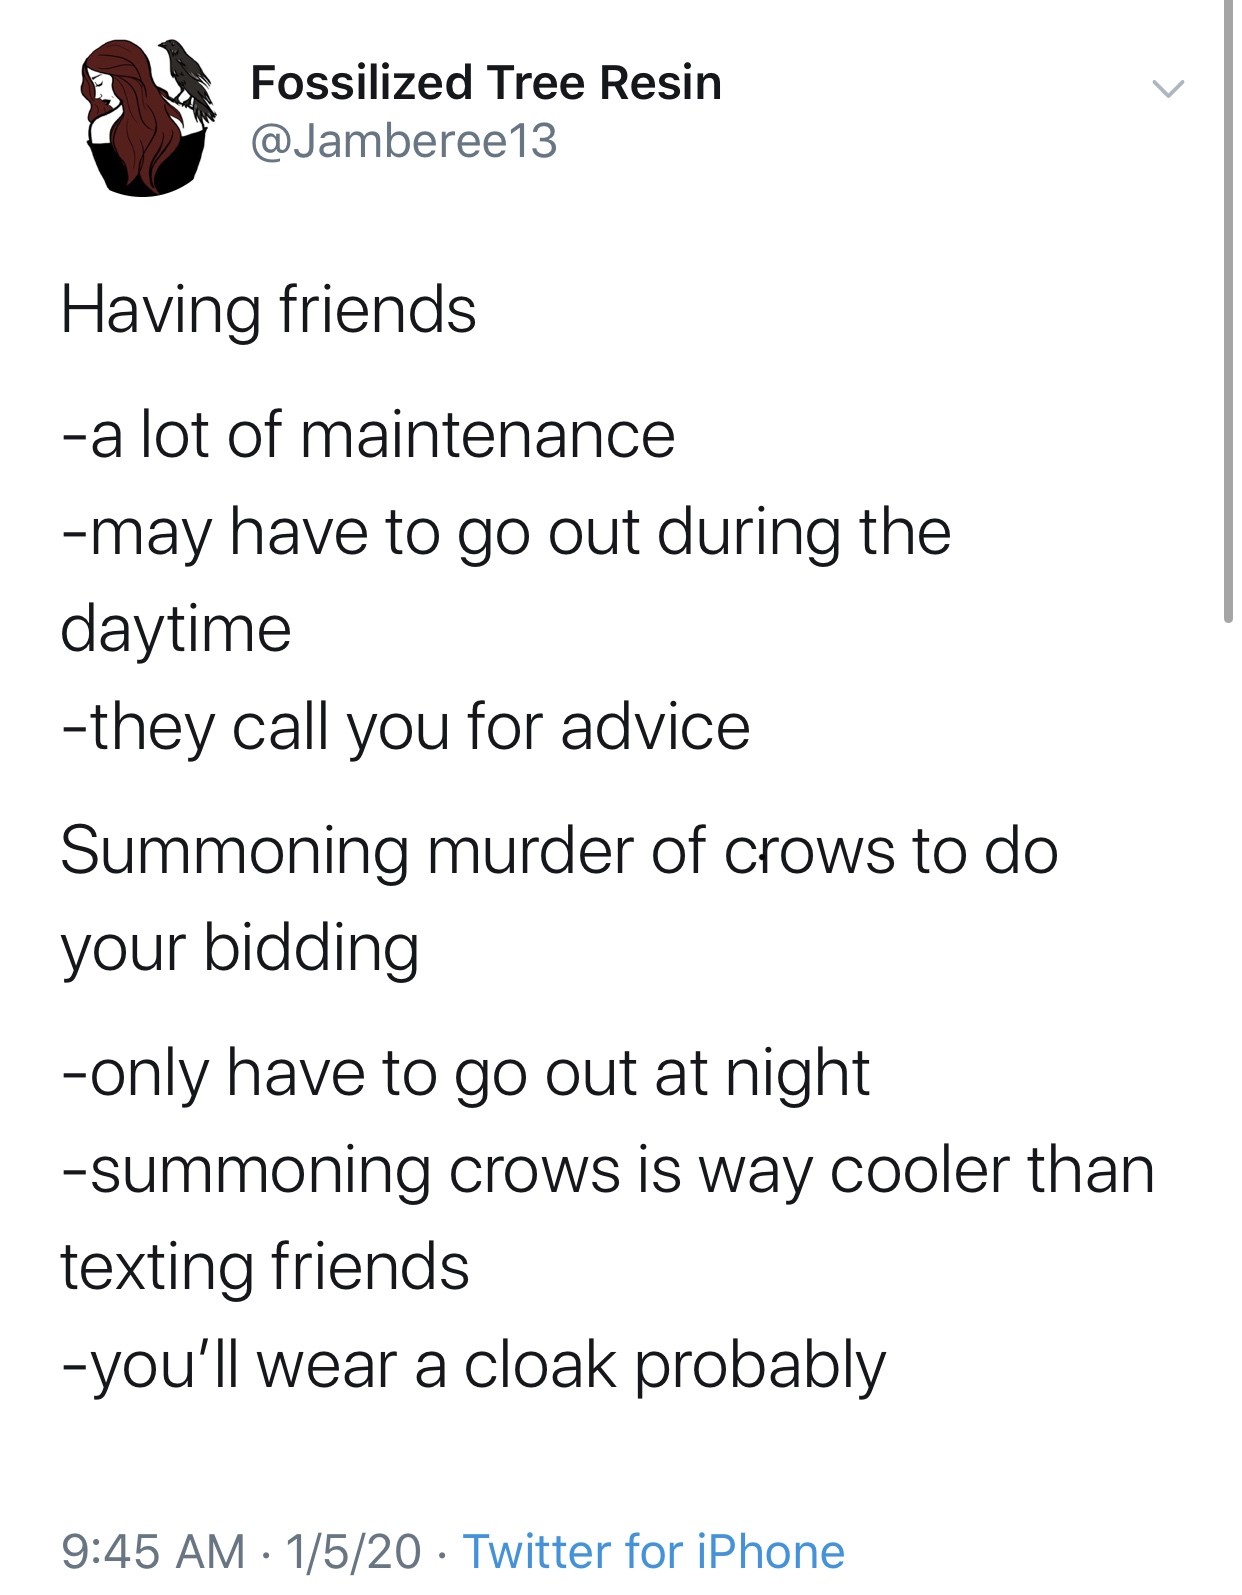 document - Fossilized Tree Resin Having friends a lot of maintenance may have to go out during the daytime they call you for advice Summoning murder of crows to do your bidding only have to go out at night summoning crows is way cooler than texting friend